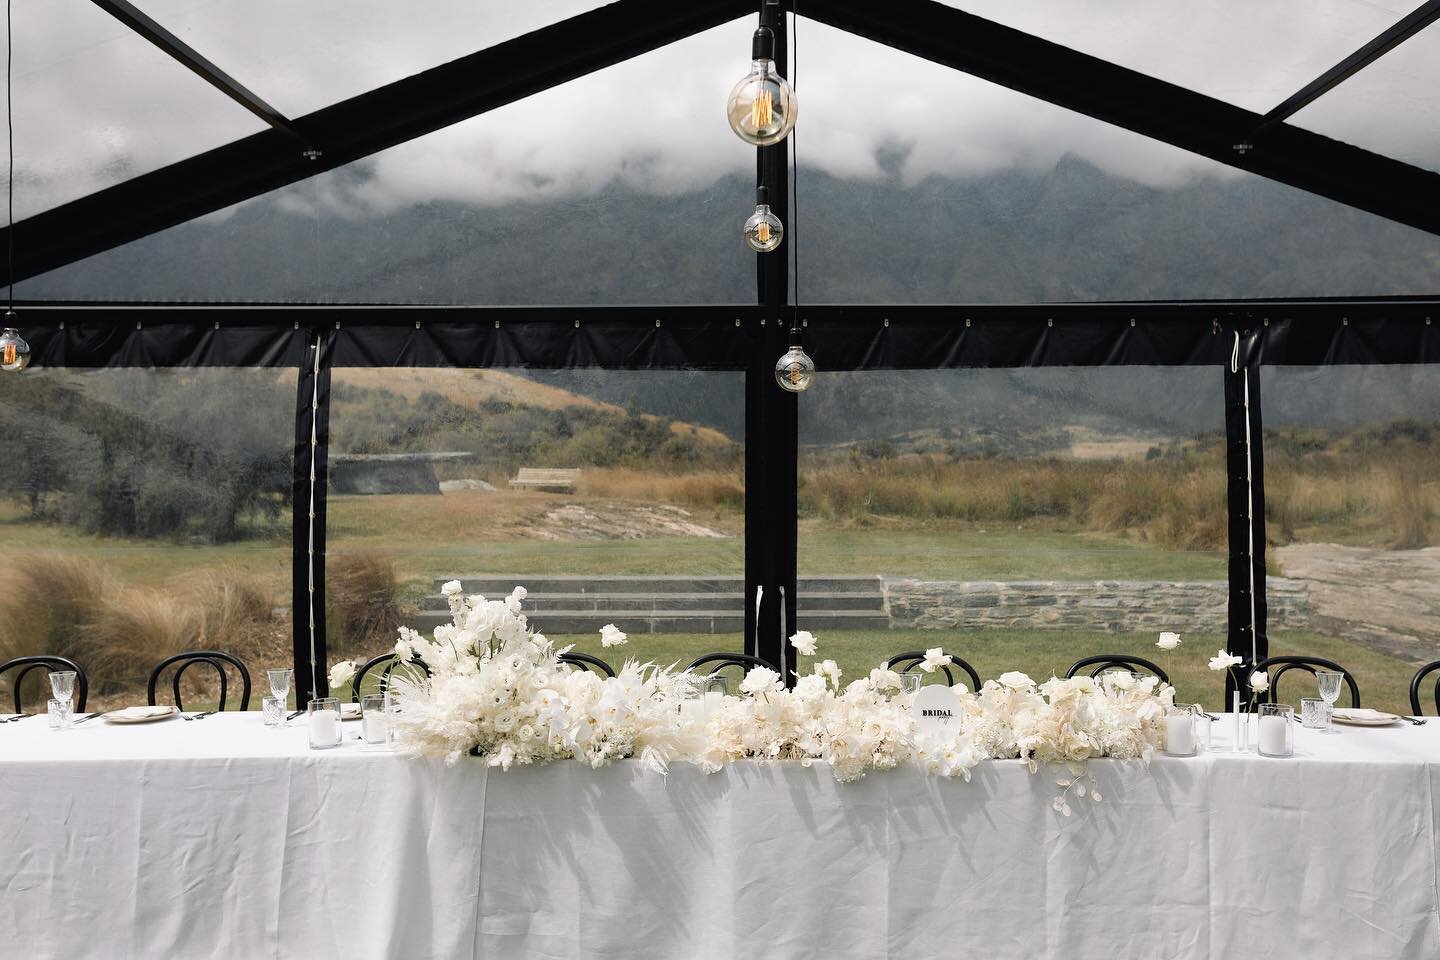 &lt; The head table looking pretty in our ALPS EDITION MARQUEE thanks to the talented team @allbunchedup_ &gt; 

Image // @stephanandnakita
Lighting // @visualeventsqueenstown 
Florals // @allbunchedup_
On day coordination // @onefinedayweddings